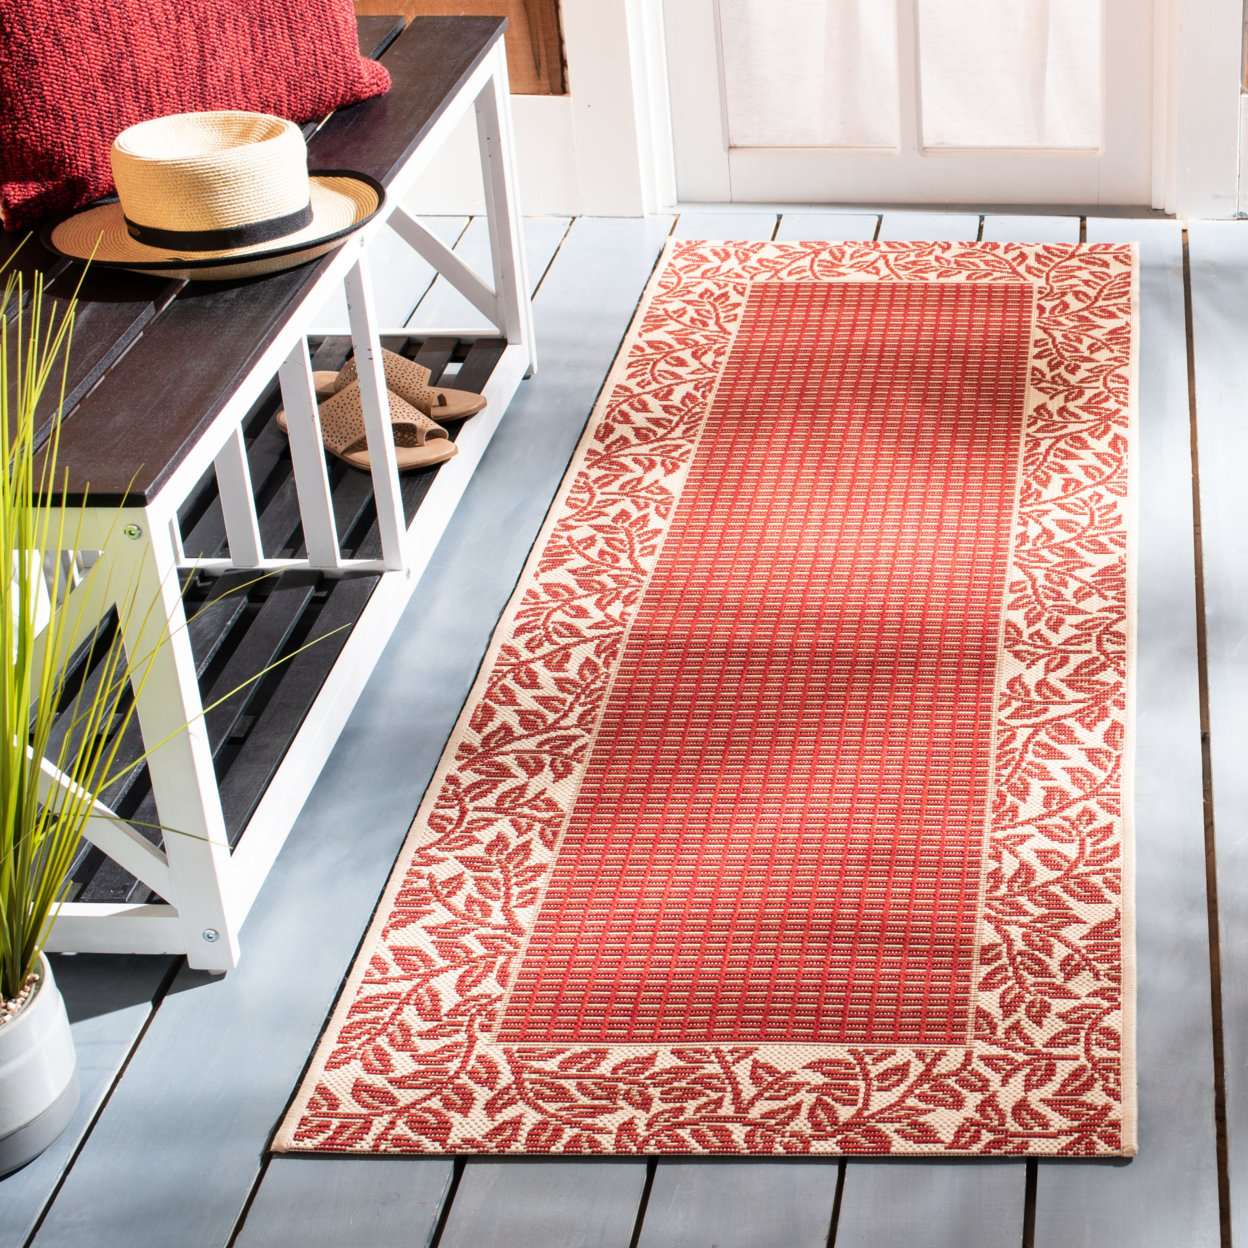 SAFAVIEH Courtyard CY0727-3707 Red / Natural Rug - 9' X 12'